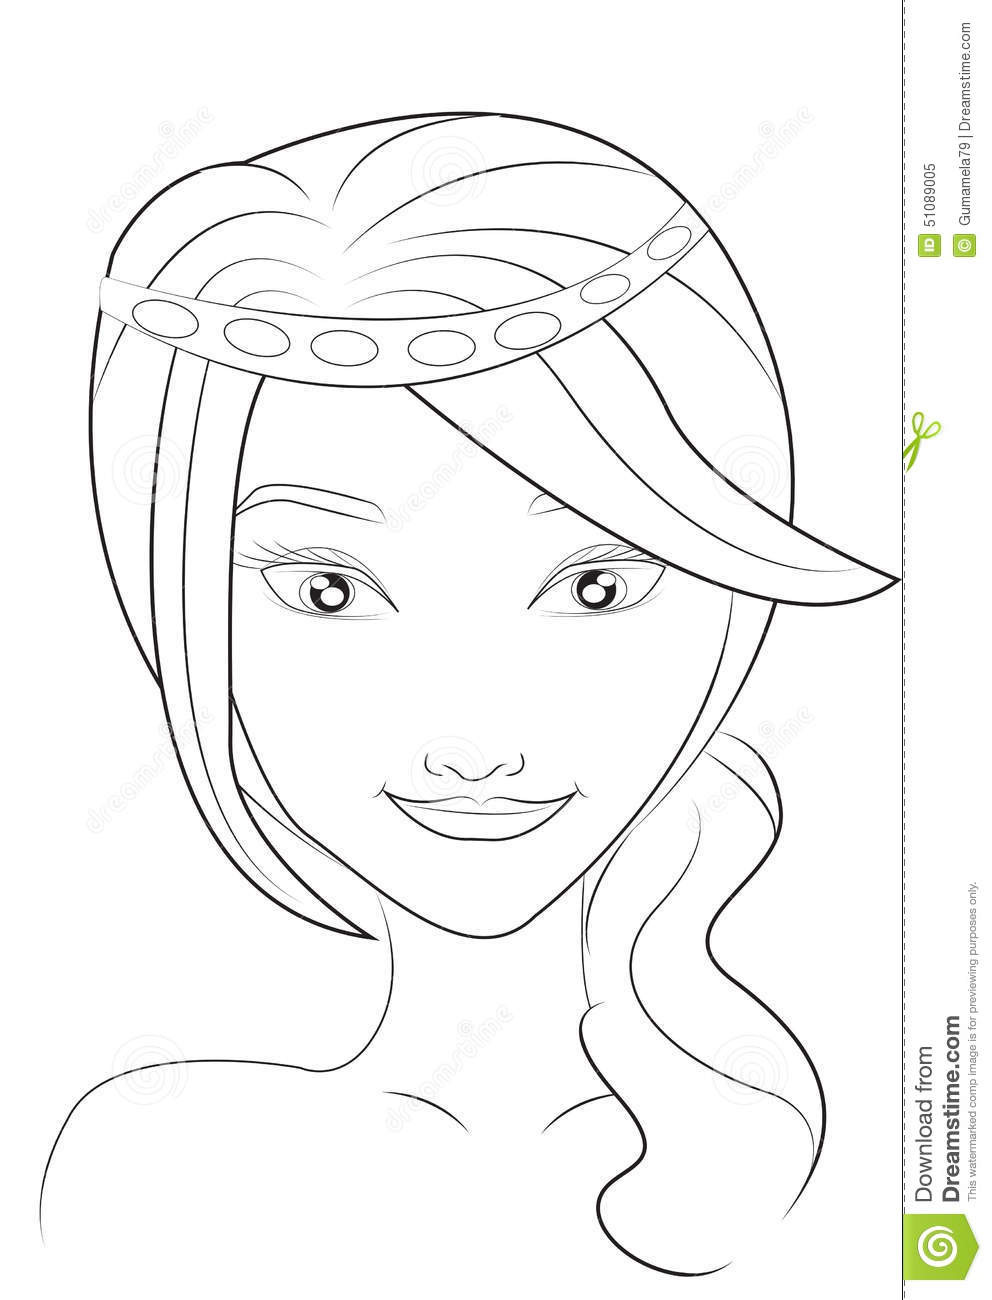 Coloring Pages Of Girls Faces
 Girl s face coloring page stock illustration Illustration